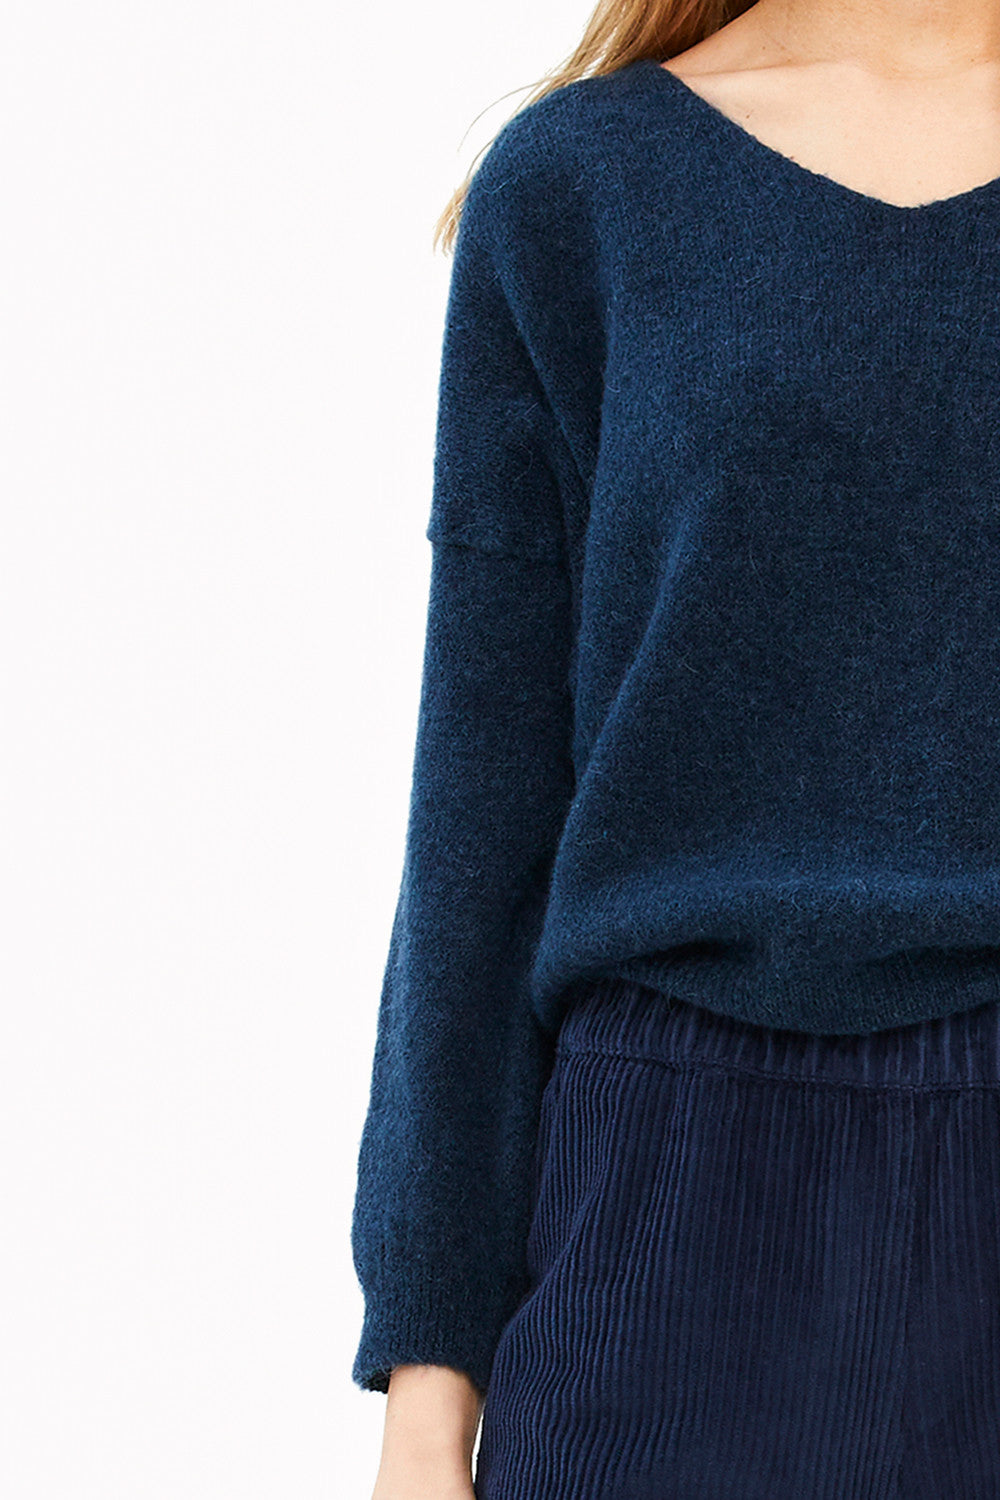 By Bar - blue sofie pullover